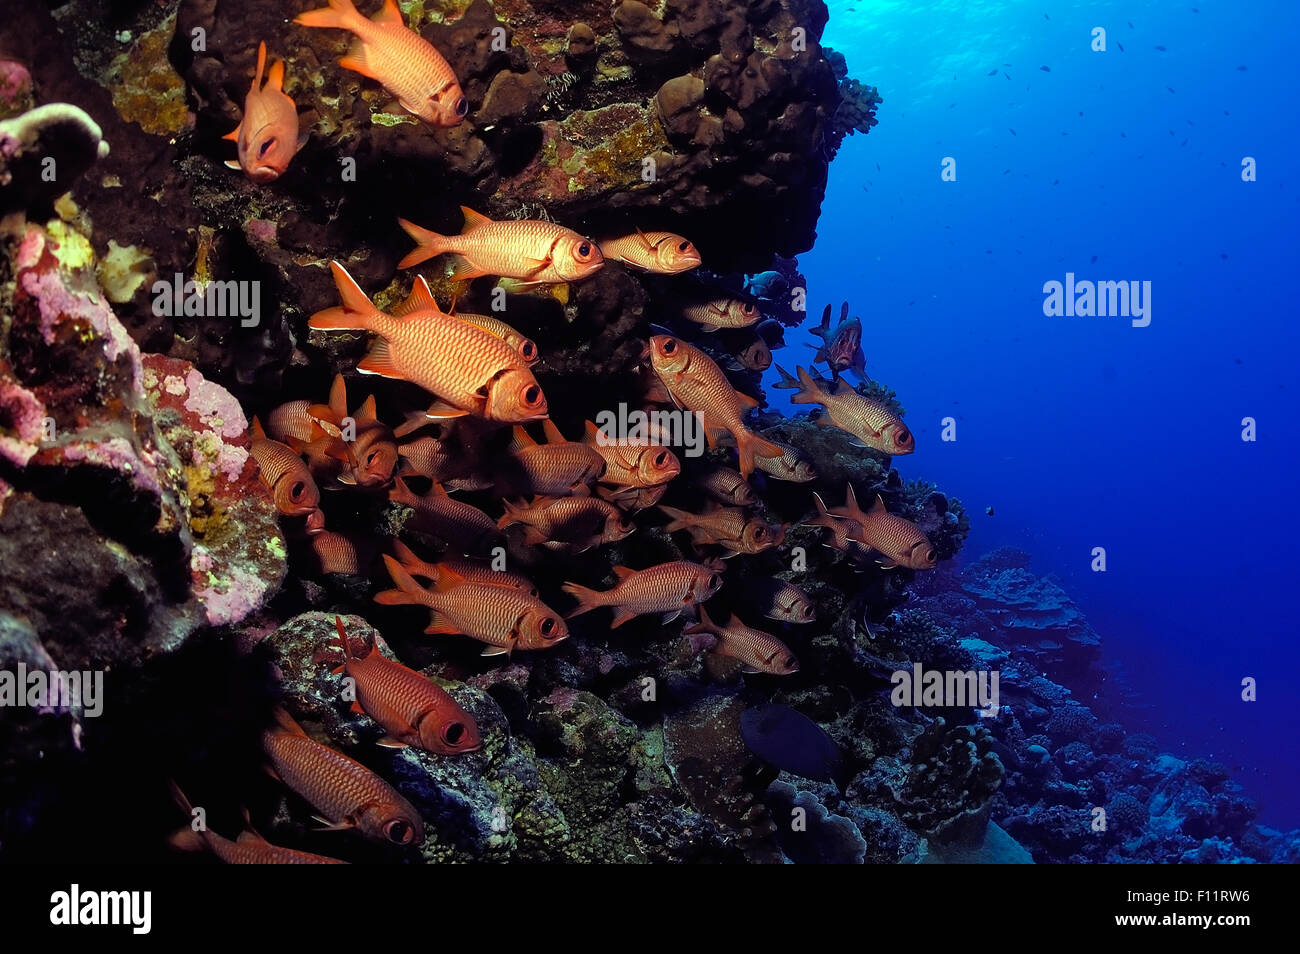 SCHOOL OF SOLDIERFISH SWIMMING FRONT OF CORAL REEF Stock Photo